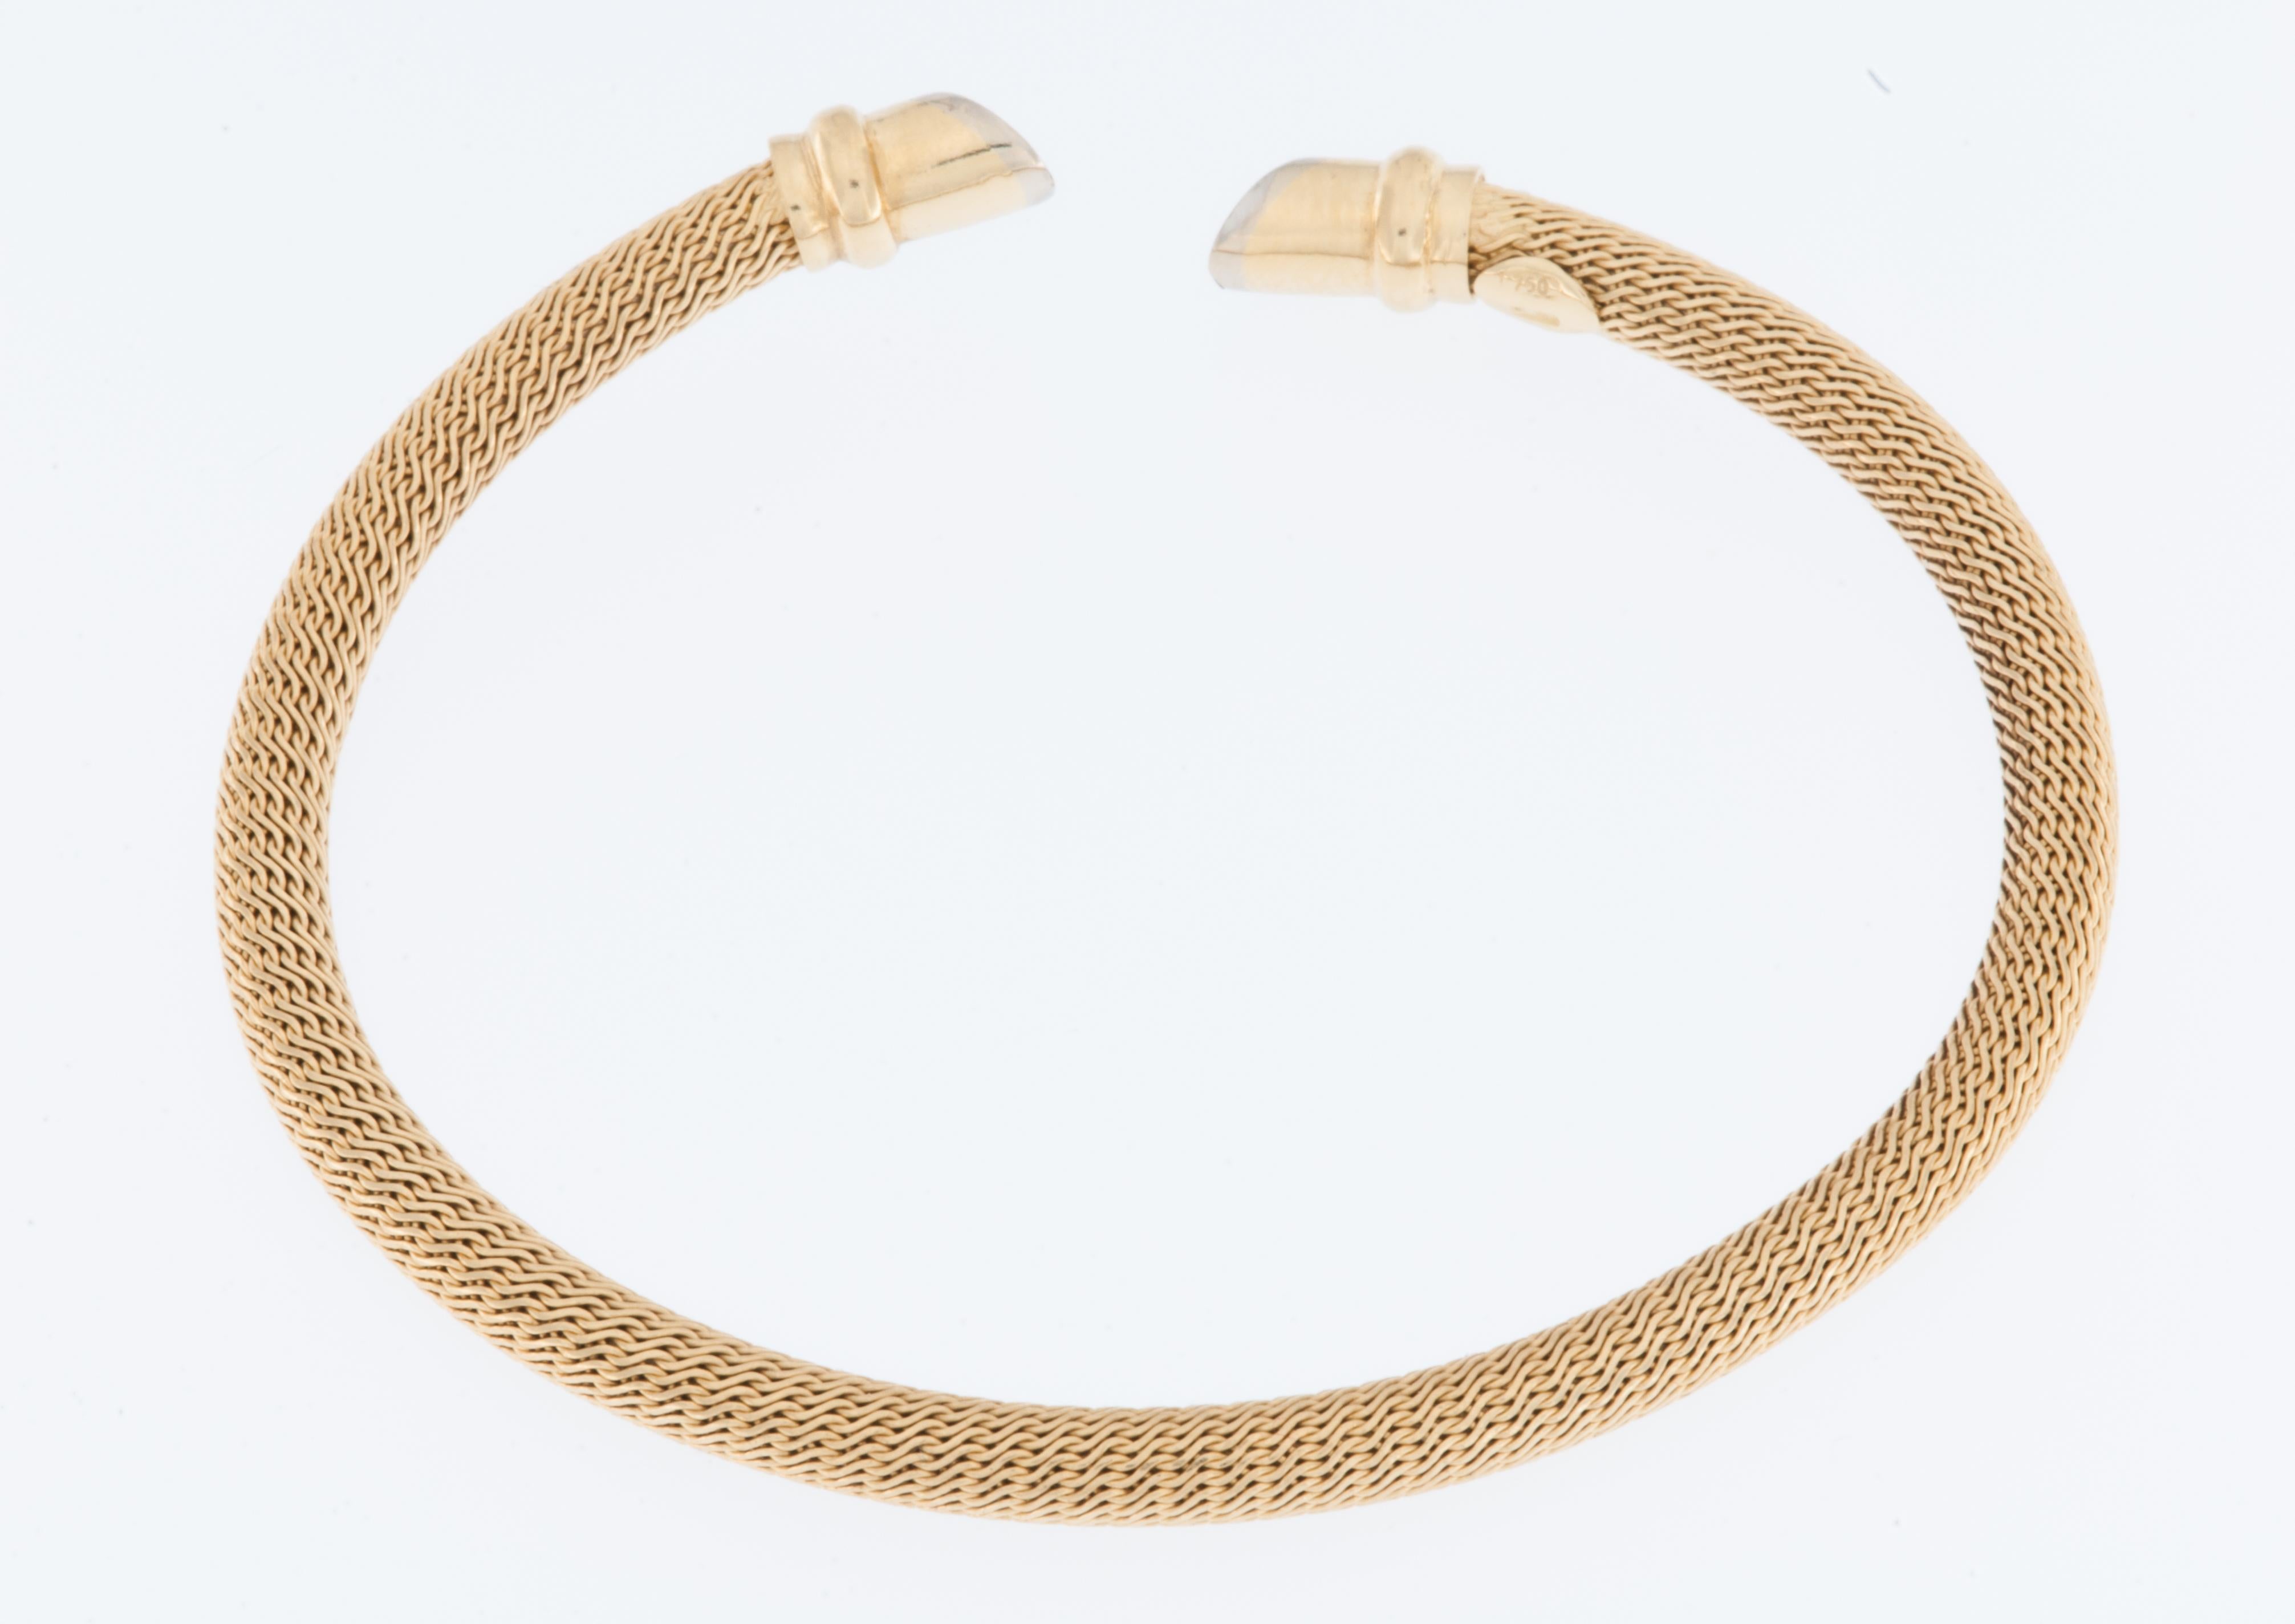 The Italian Open Bracelet is a luxurious and meticulously crafted piece of jewelry that exudes elegance and sophistication. Fashioned from high-quality 18kt gold, this bracelet seamlessly combines the warm tones of yellow gold with the timeless